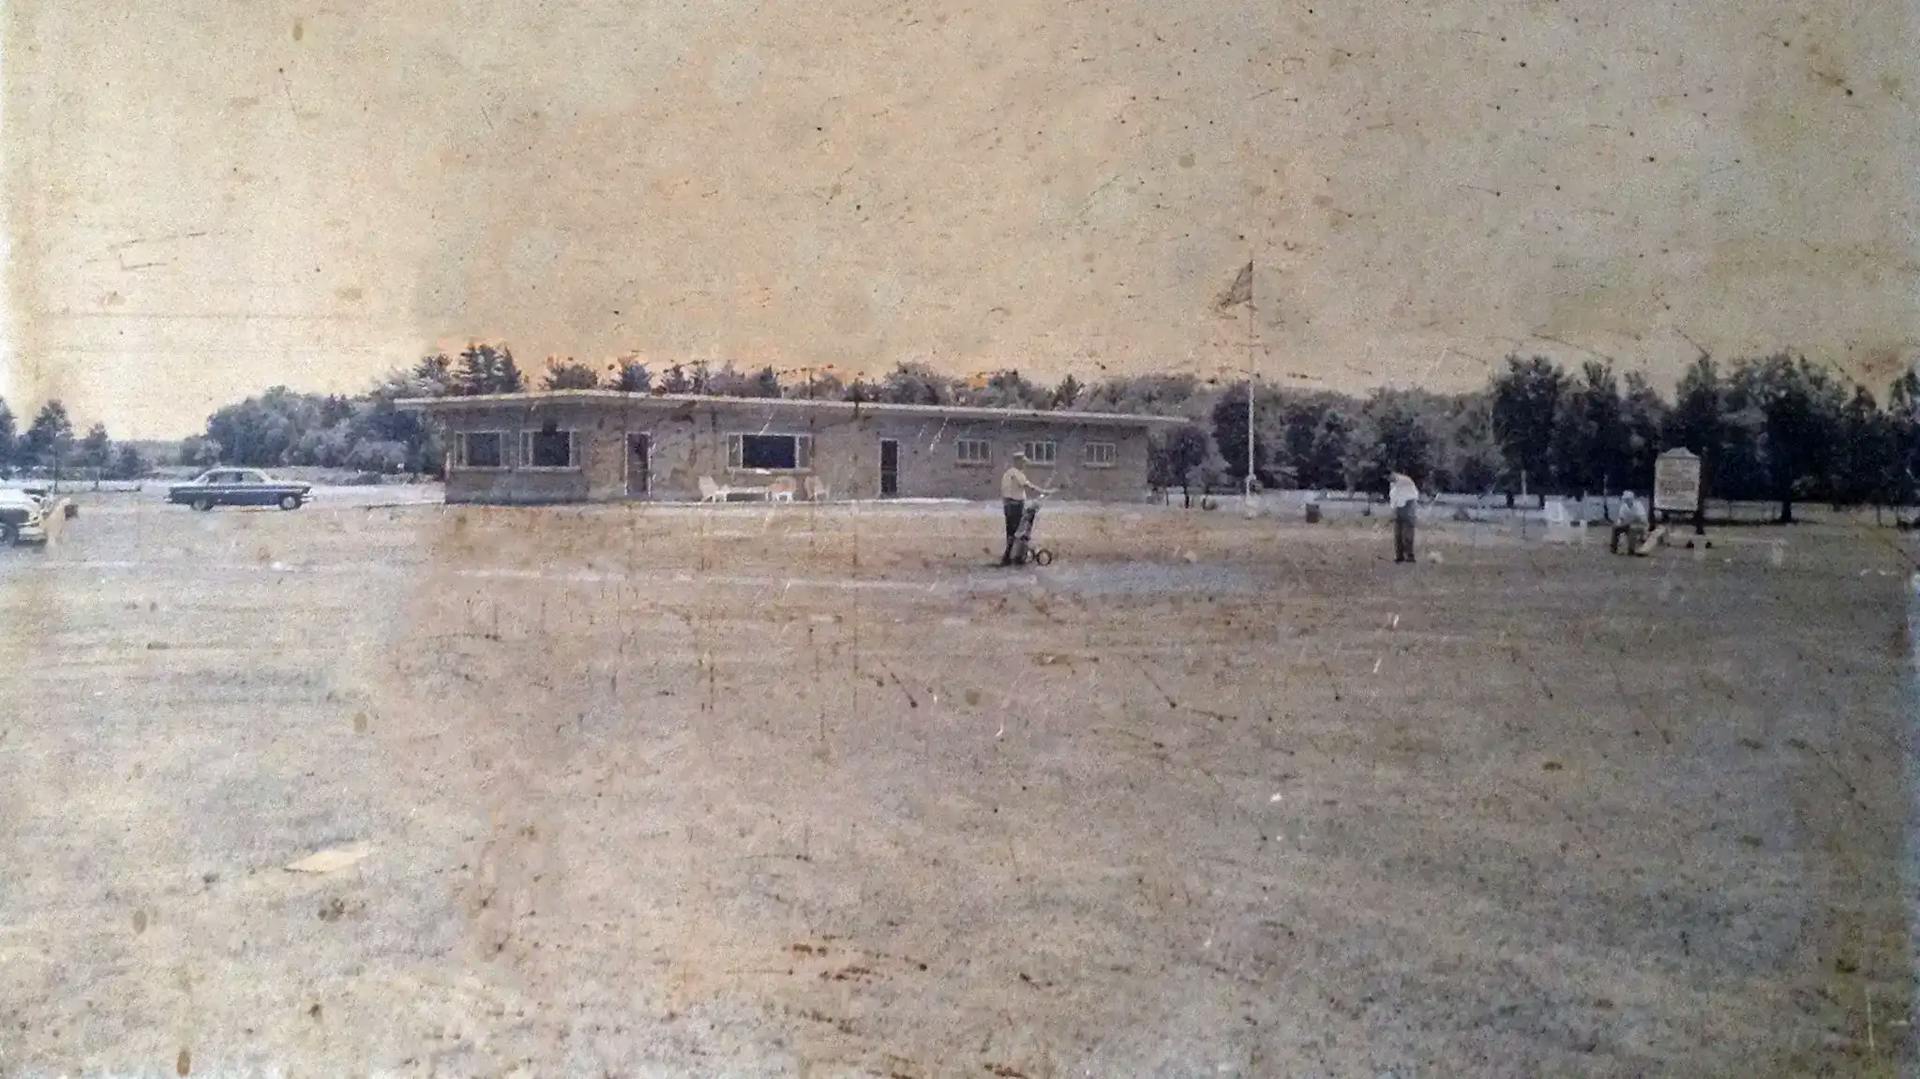 The clubhouse in mid-1950s